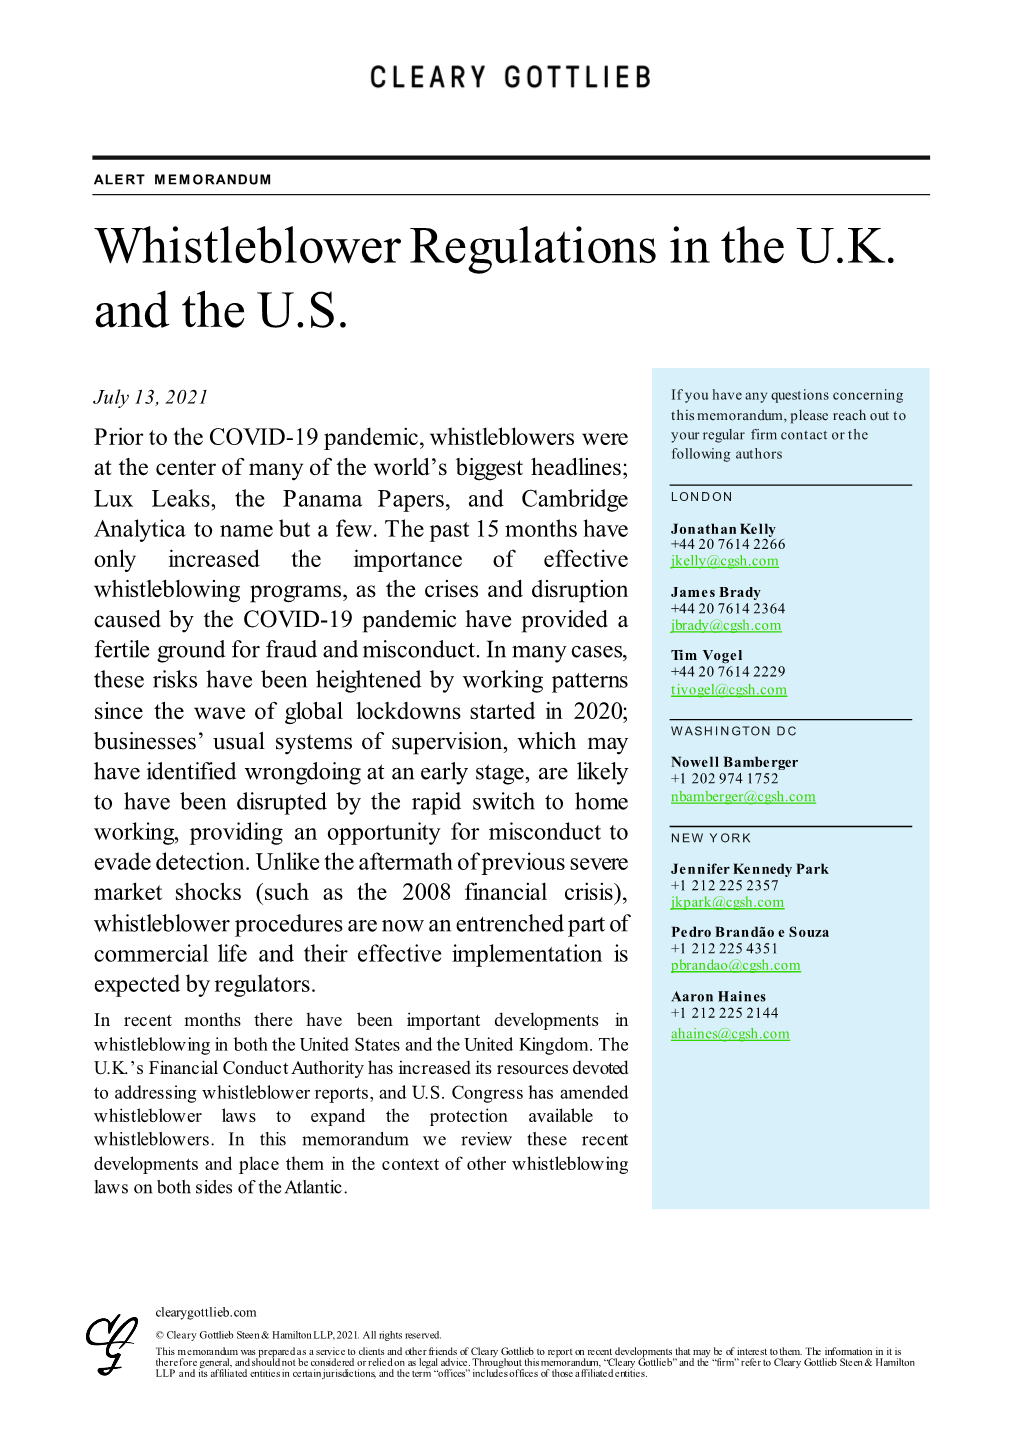 Whistleblower Regulations in the U.K. and the U.S